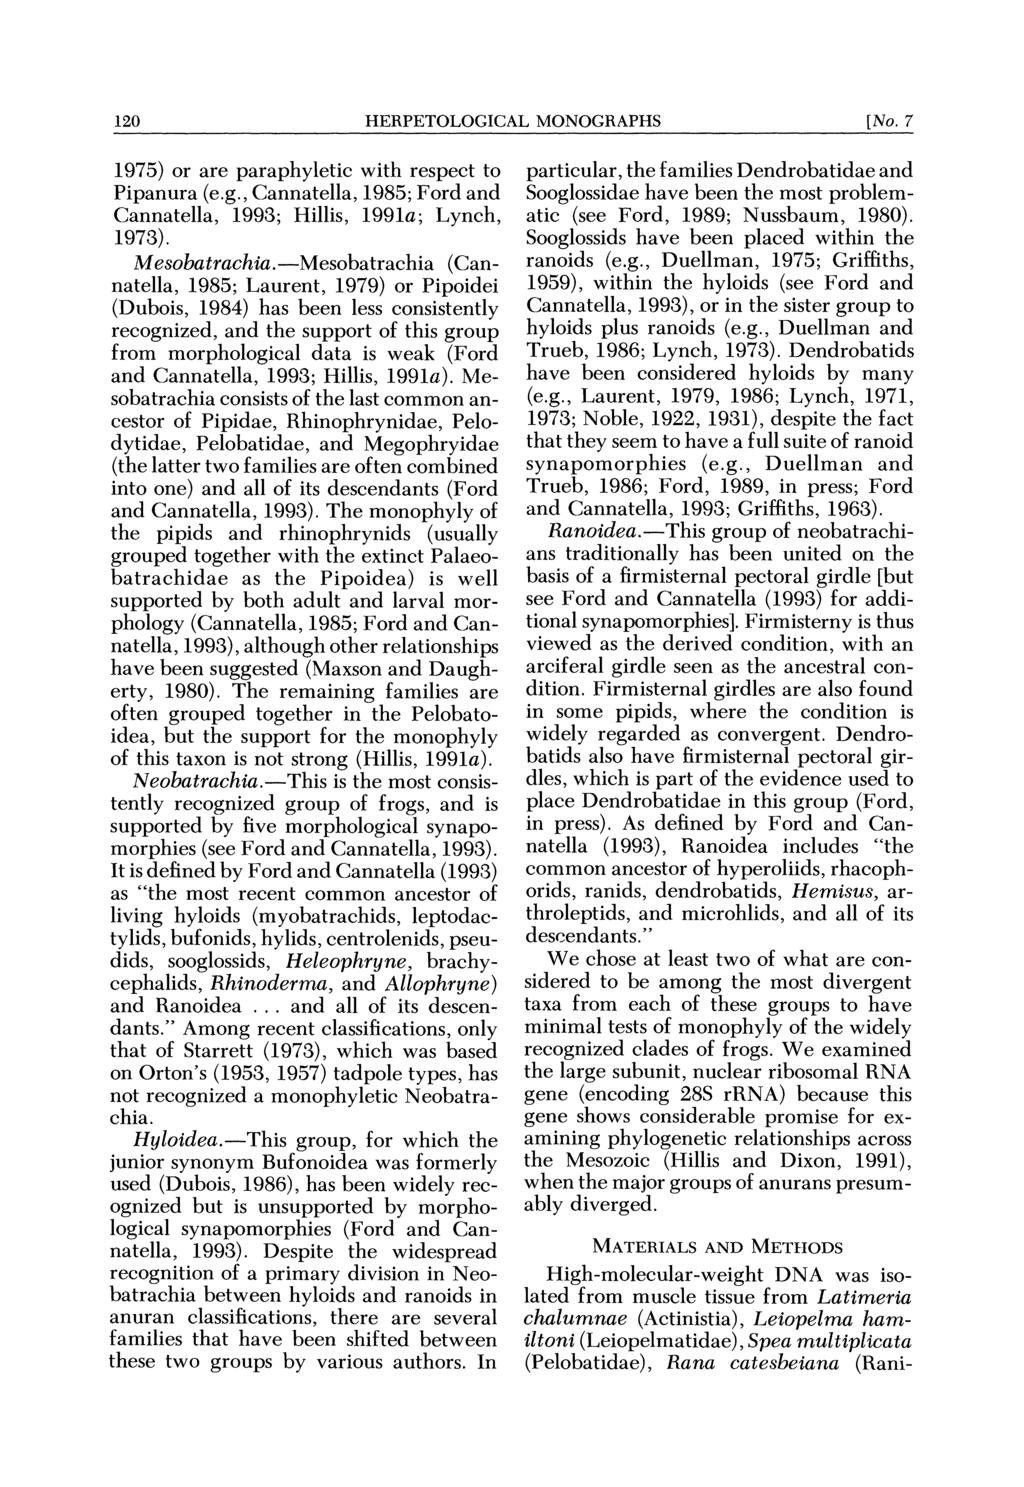 120 HERPETOLOGICAL MONOGRAPHS [No. 7 1975) or are paraphyletic with respect to Pipanura (e.g., Cannatella, 1985; Ford and Cannatella, 1993; Hillis, 1991a; Lynch, 1973). Mesobatrachia.